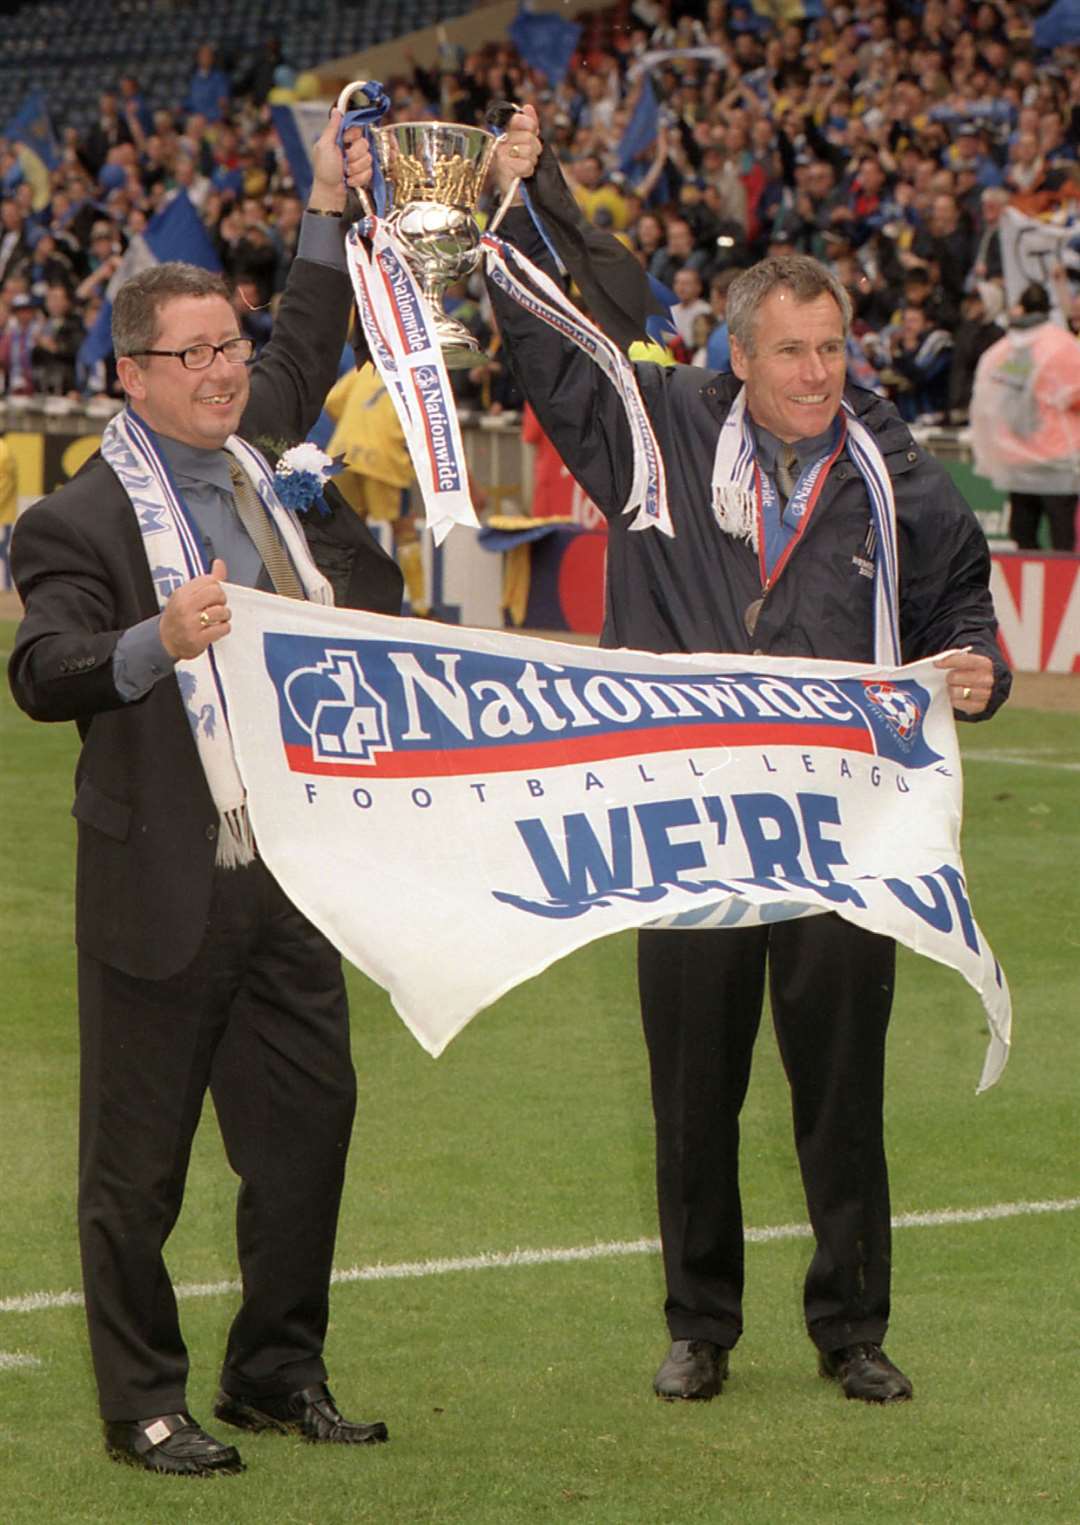 After the heartbreak in 1999, Paul Scally and Peter Taylor celebrate promotion to Division 1 at Wembley in 2000